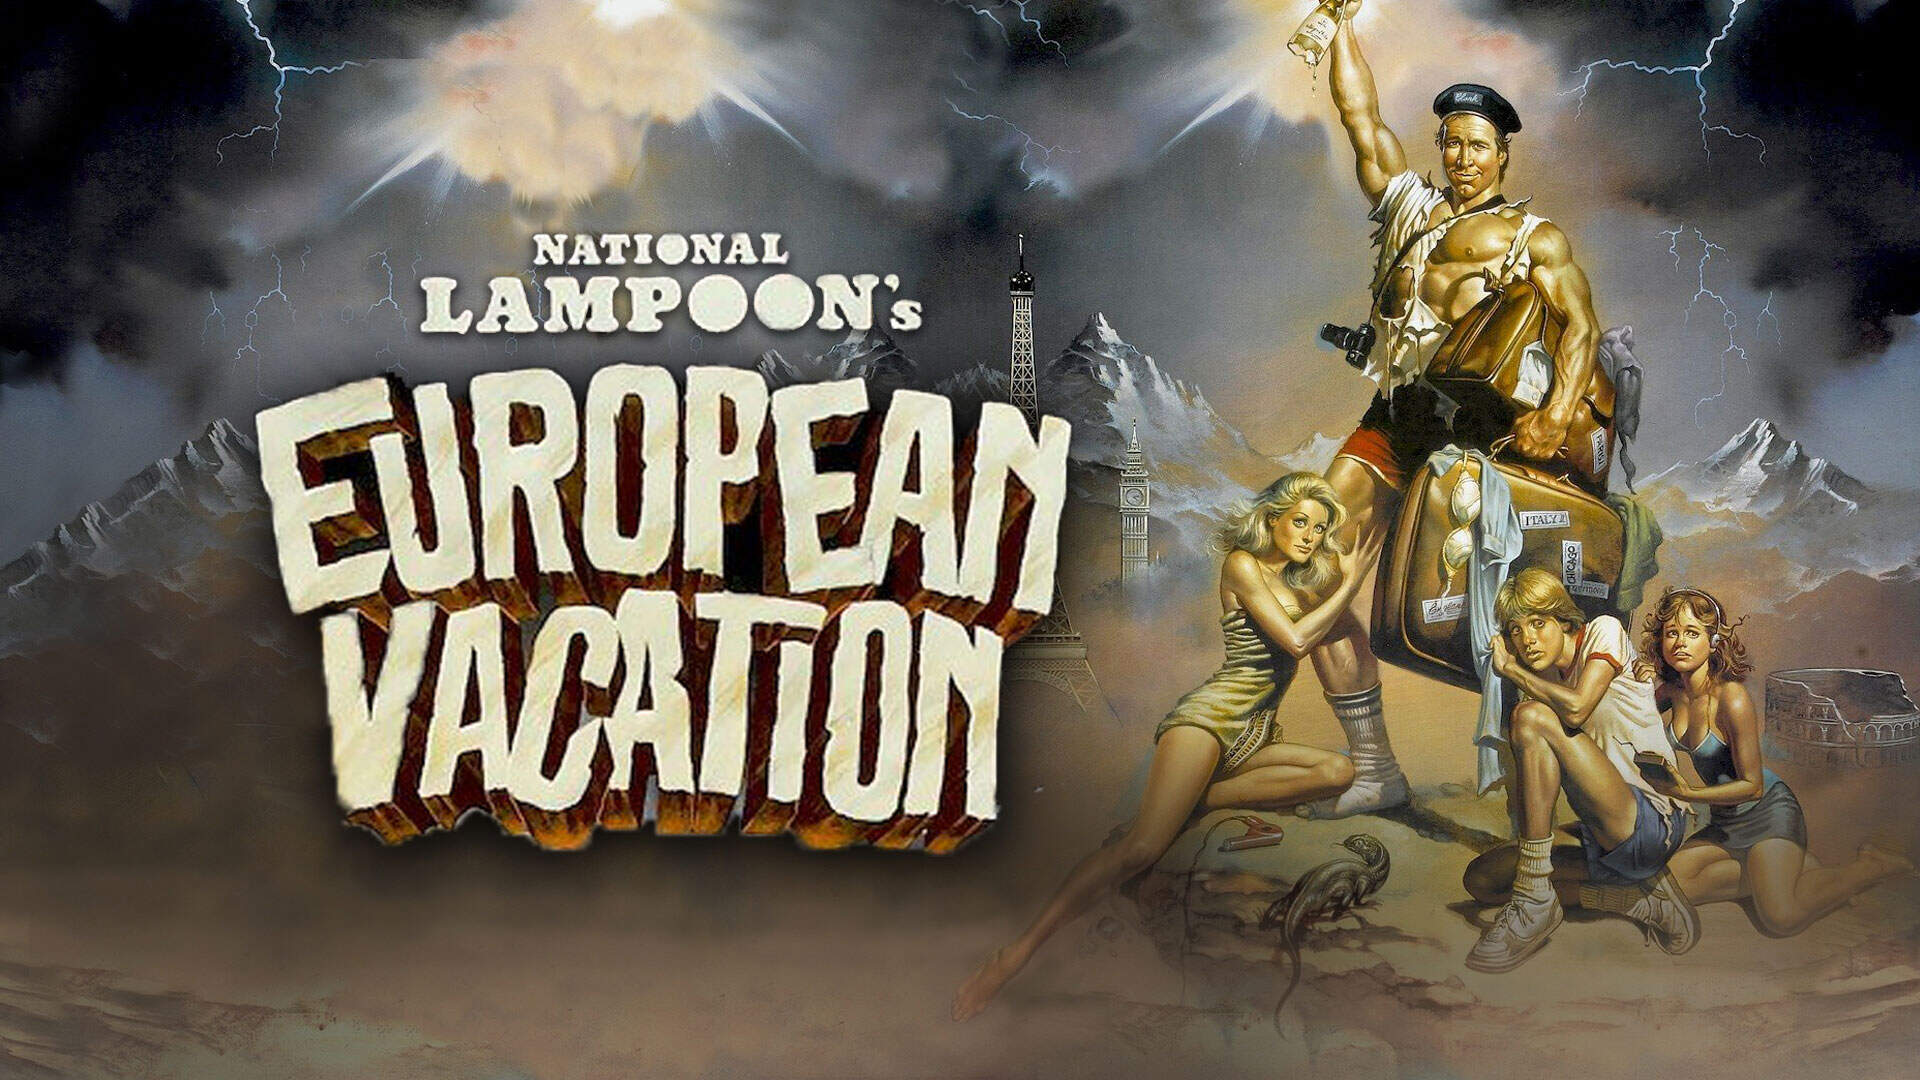 30-facts-about-the-movie-national-lampoons-european-vacation